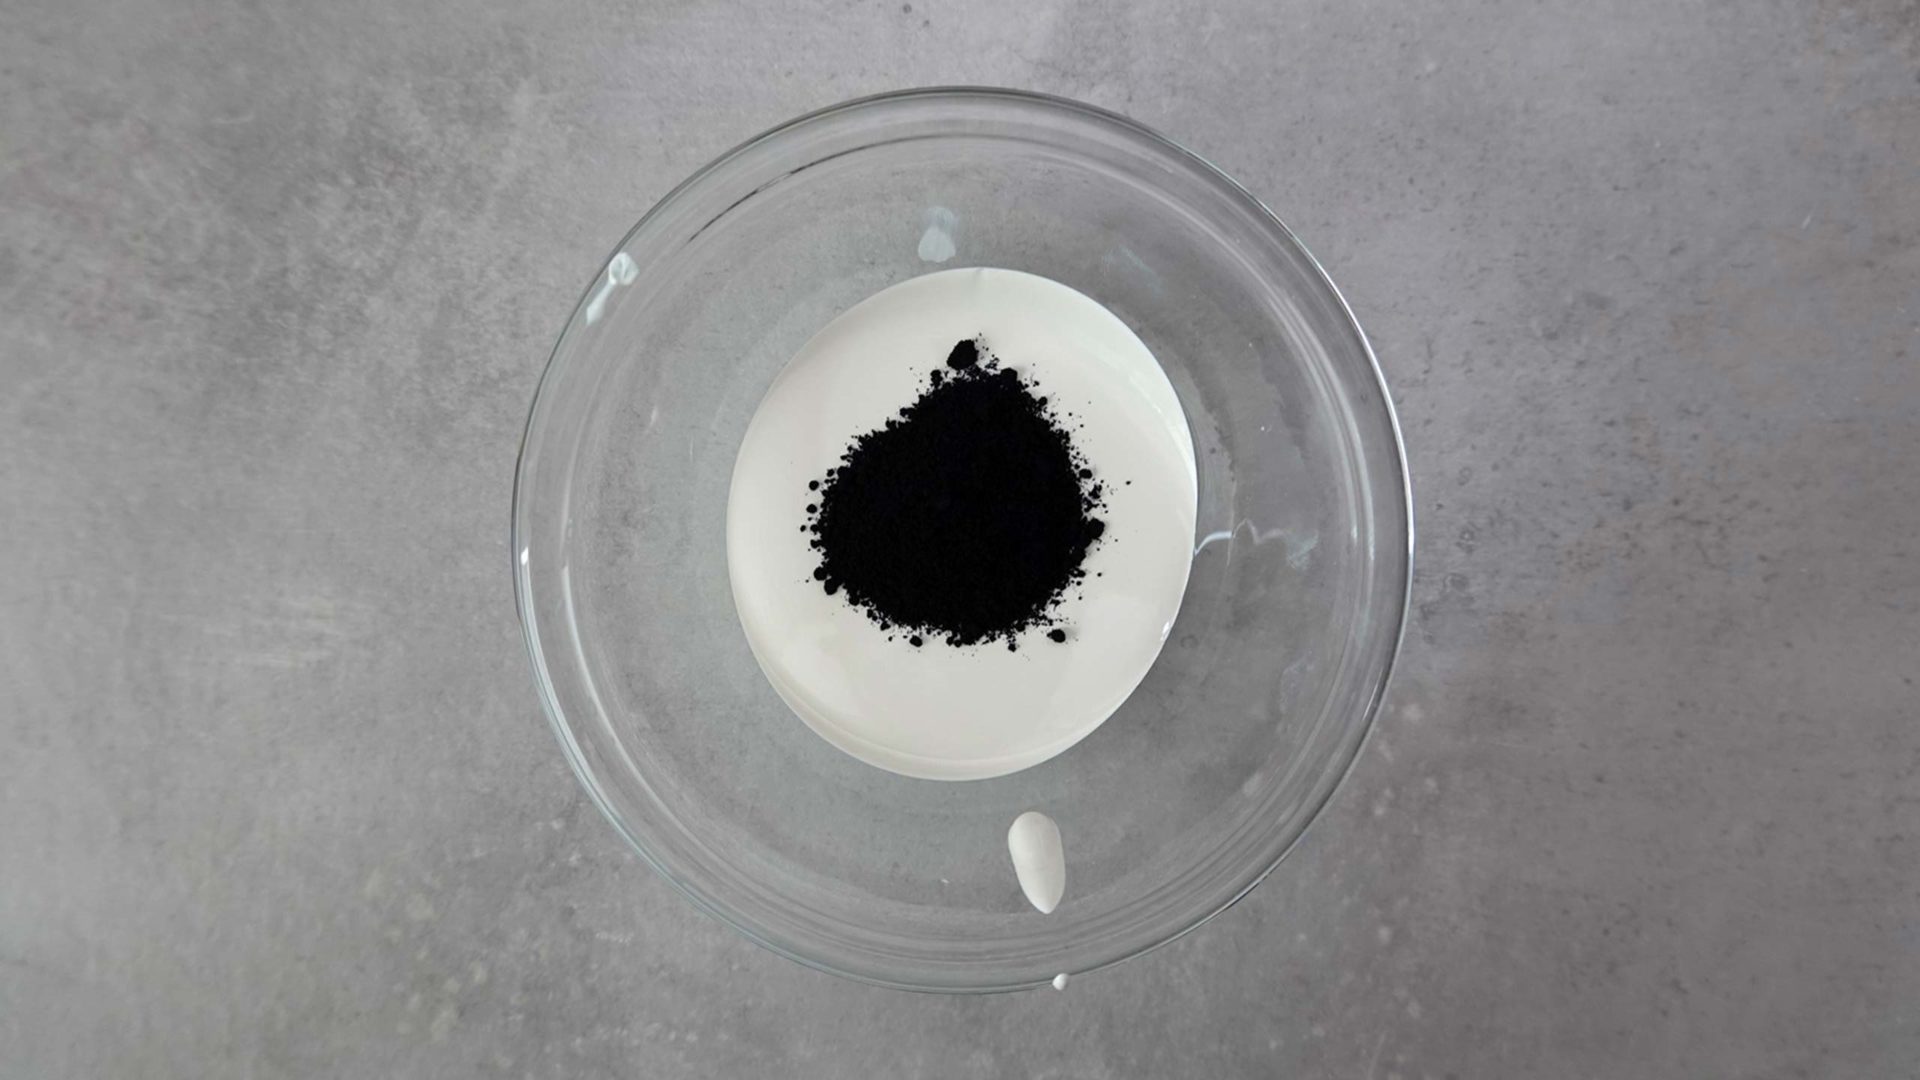 White chocolate mass with black color powder in glass bowl